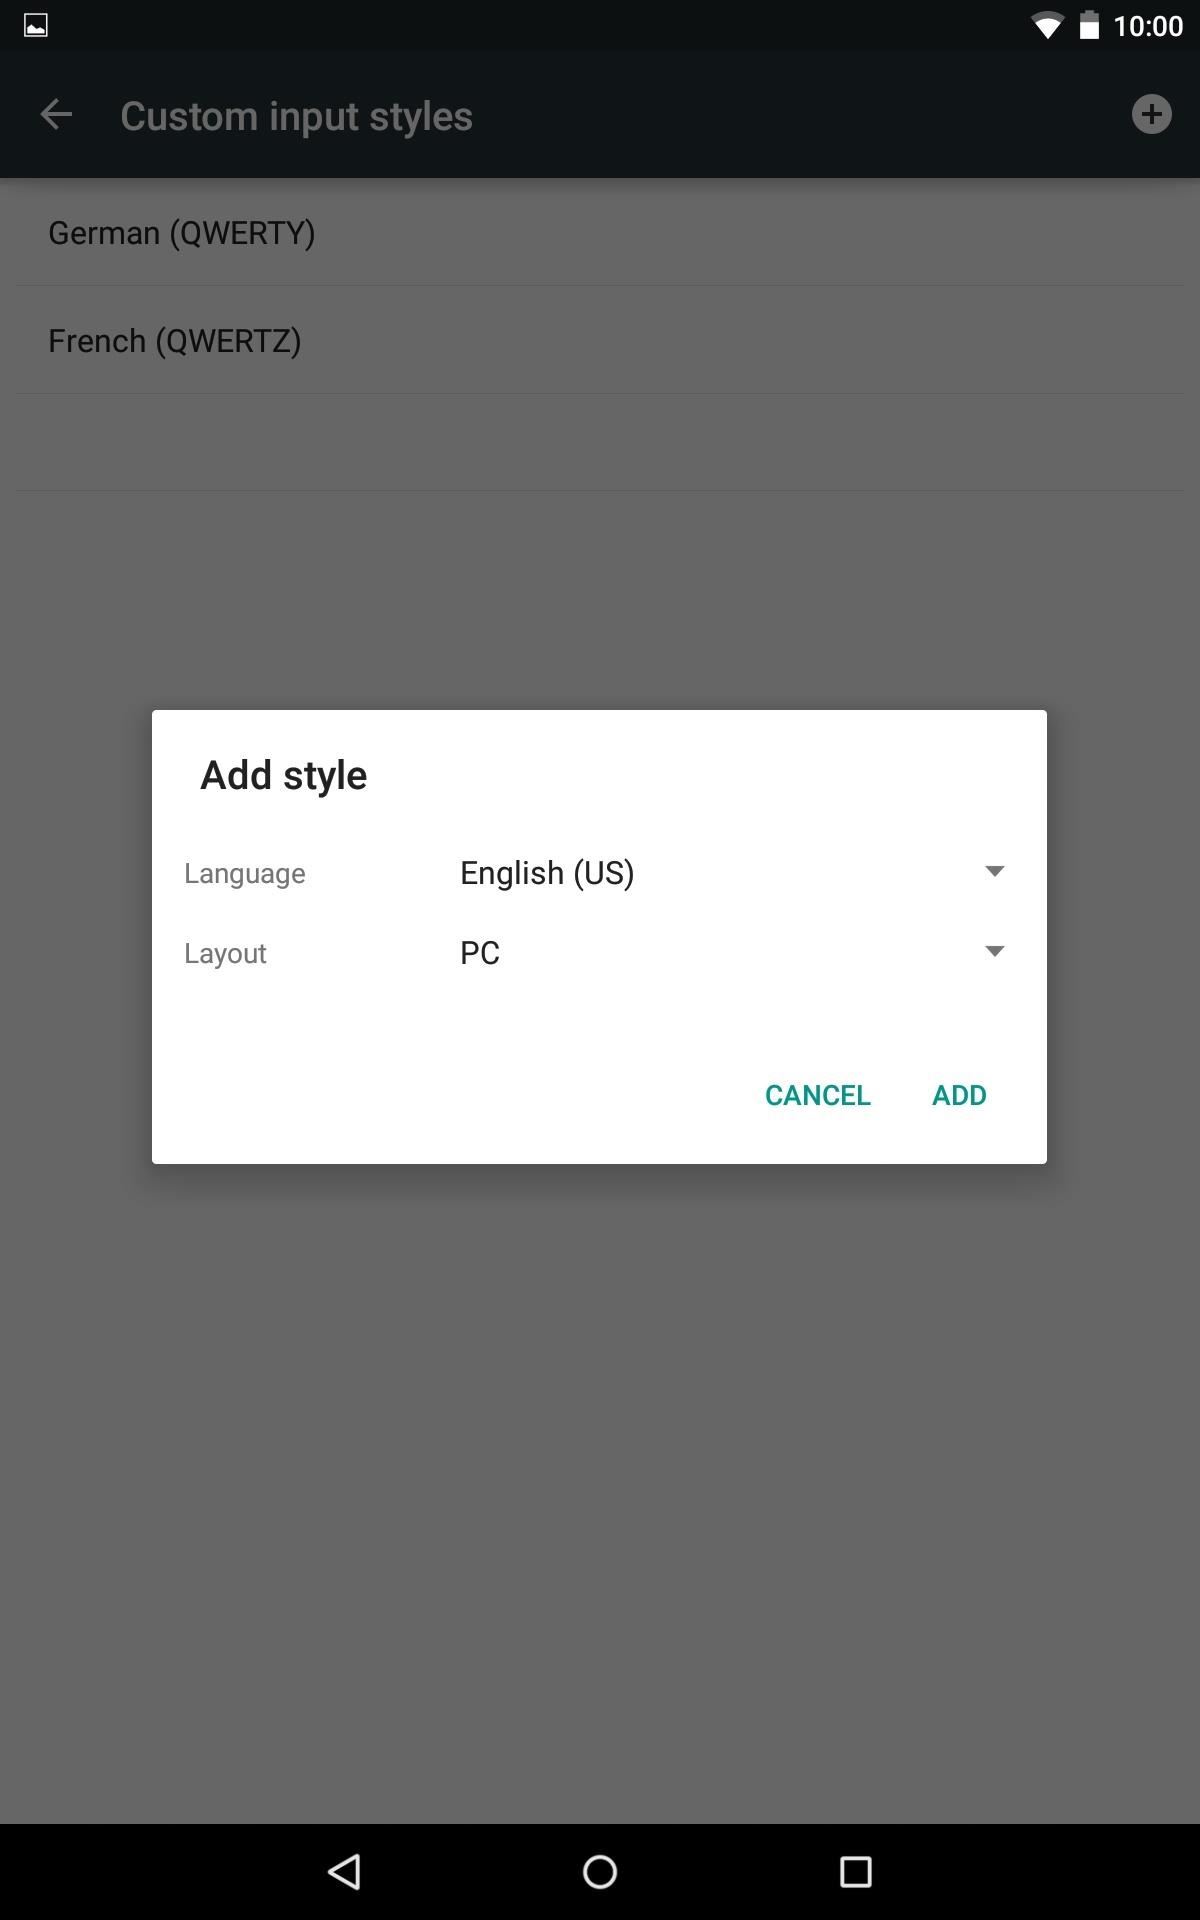 Enable the Hidden Number Row in Google Keyboard on Your Android